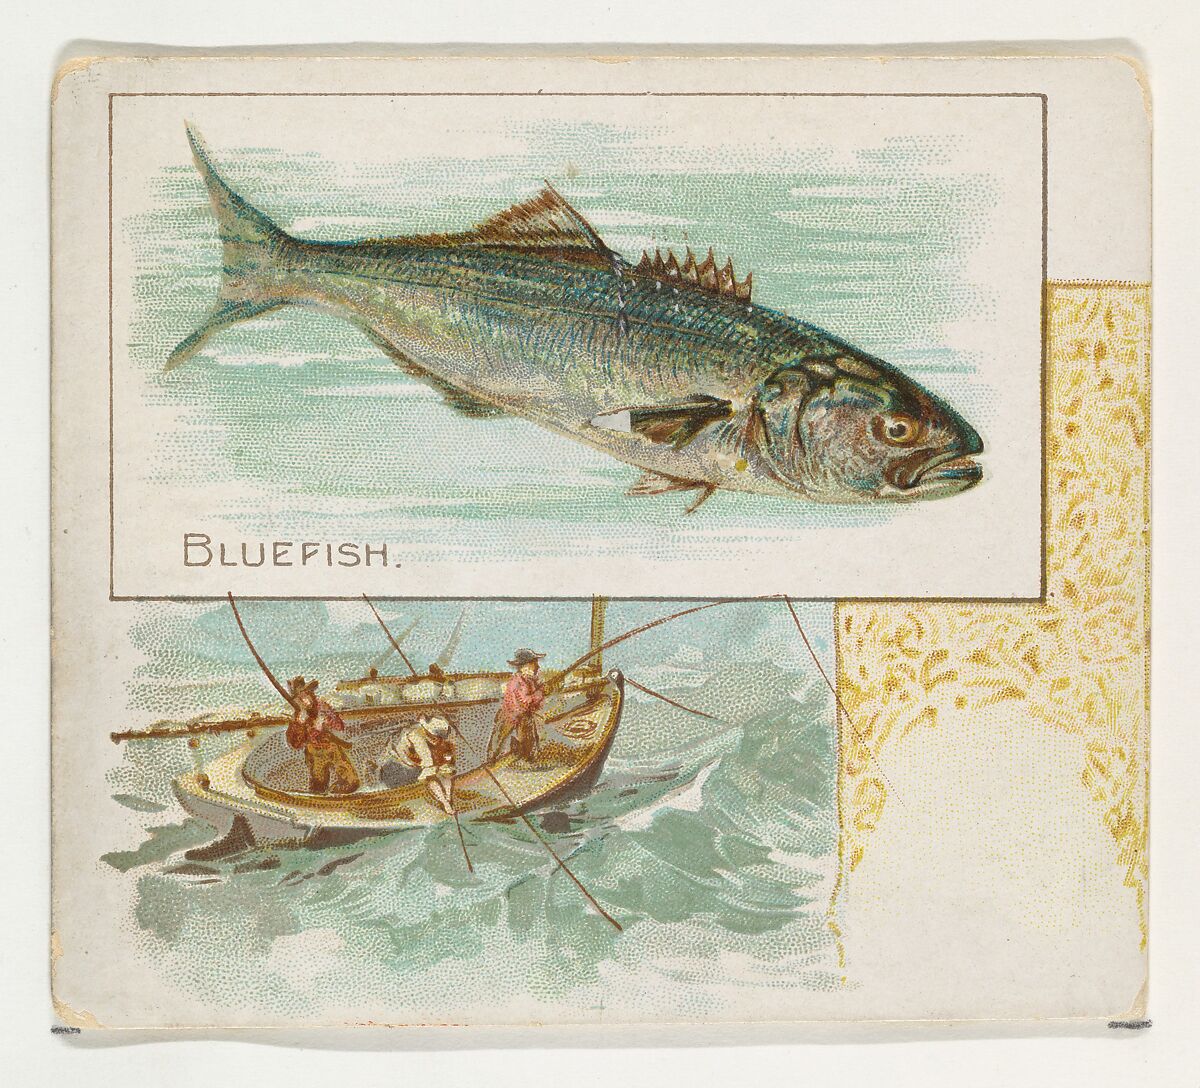 Bluefish, from Fish from American Waters series (N39) for Allen & Ginter Cigarettes, Issued by Allen &amp; Ginter (American, Richmond, Virginia), Commercial color lithograph 